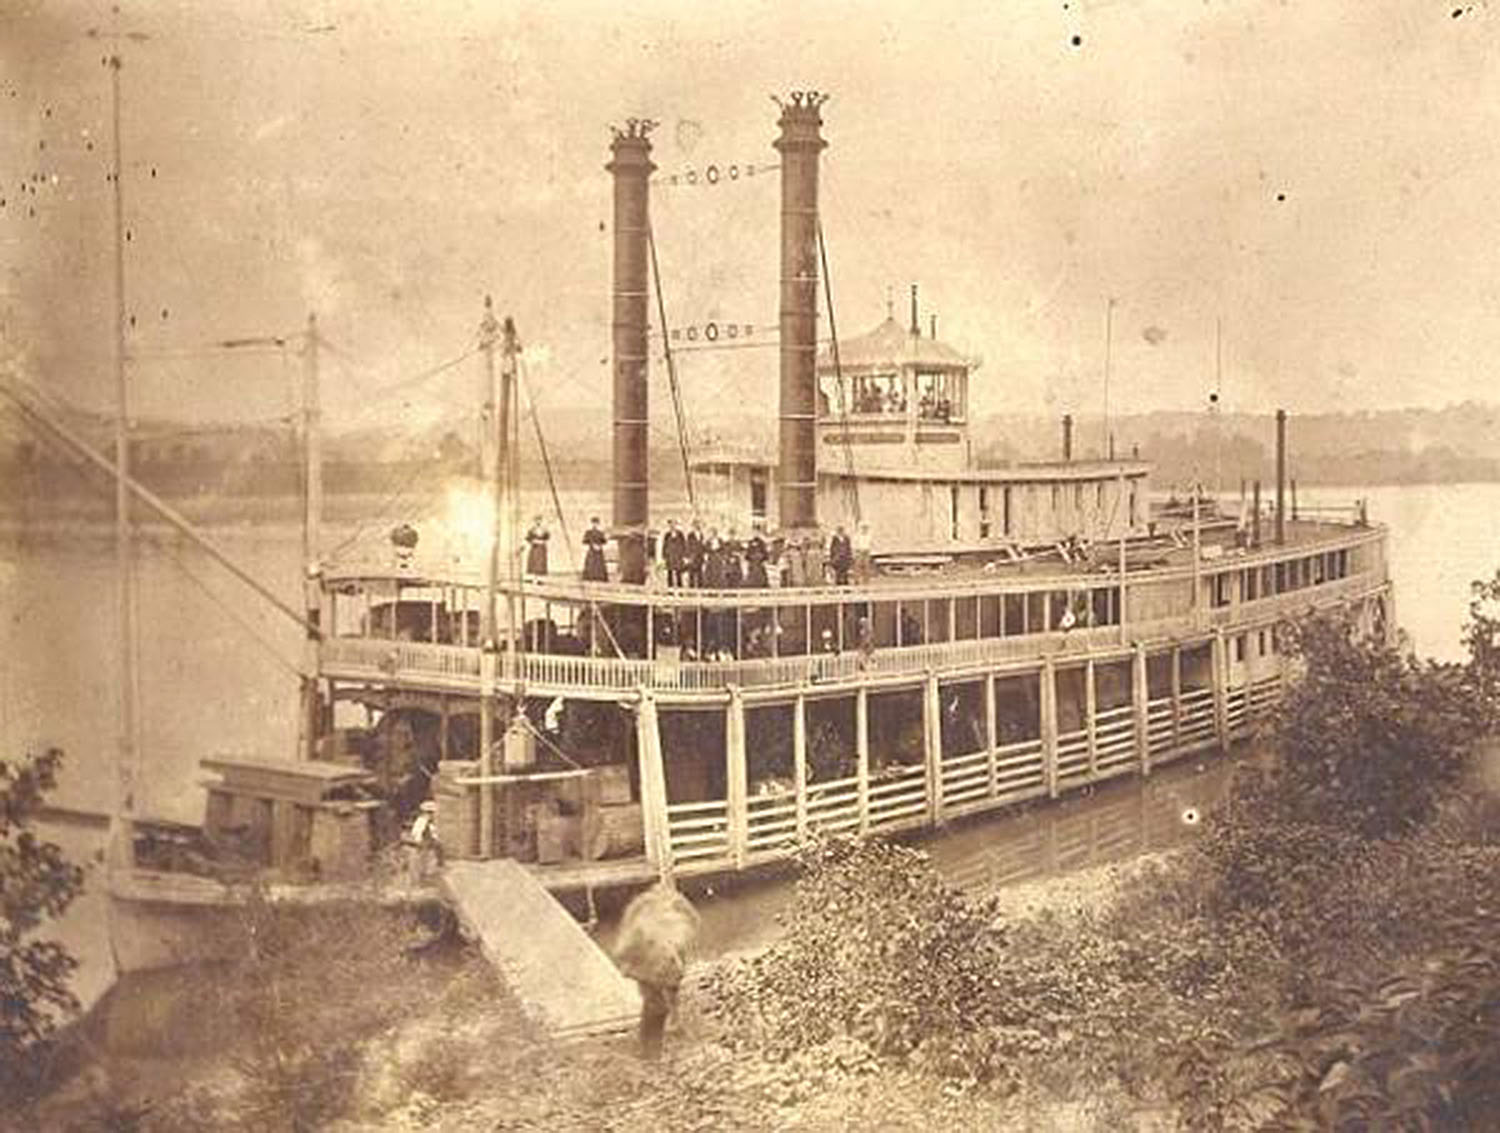 The Str. Tell City at an Ohio River landing. (Keith Norrington collection)